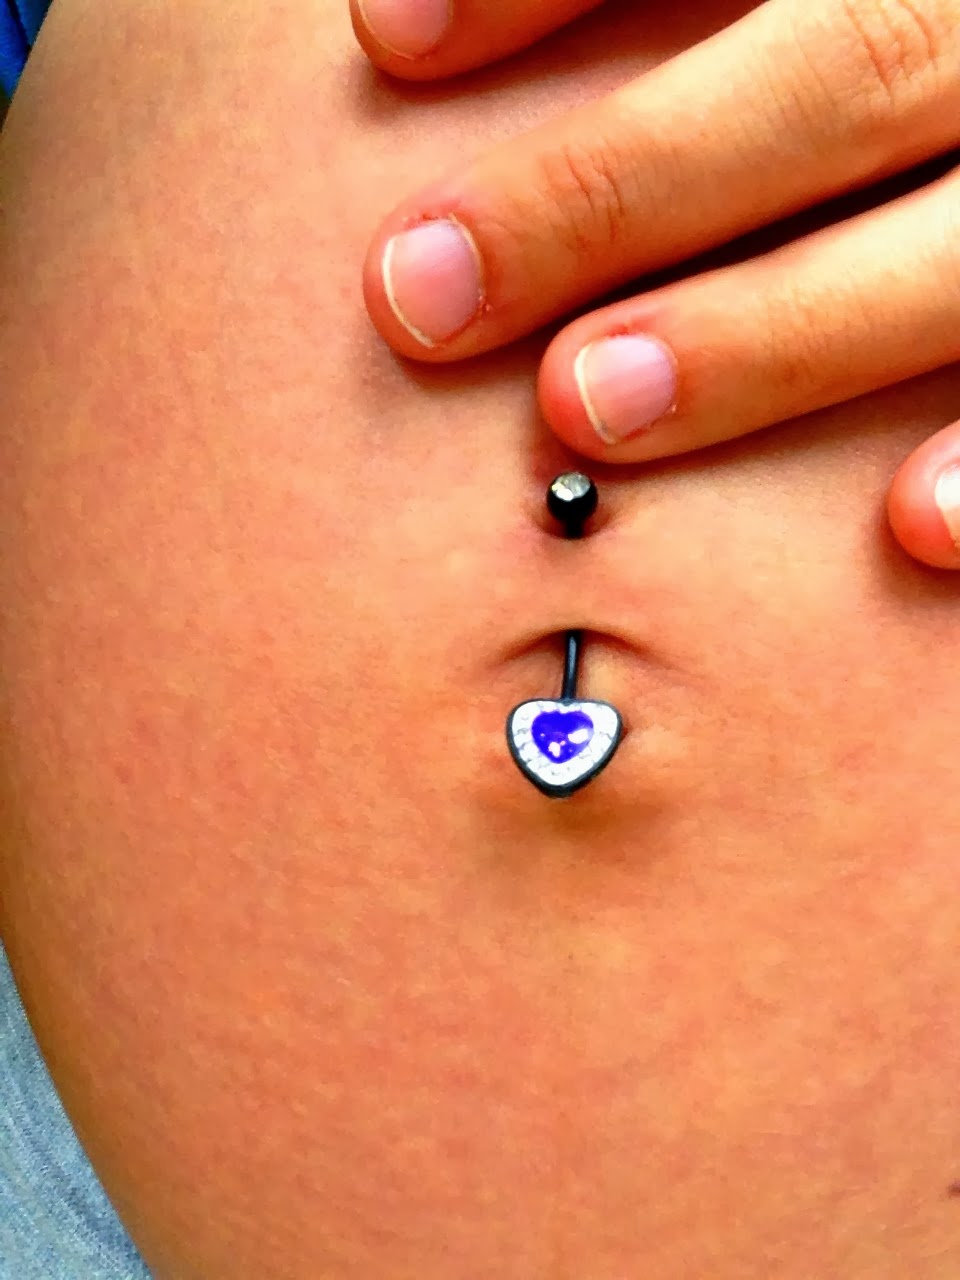 Belly Button Rings & Jewelry – Painful Pleasures